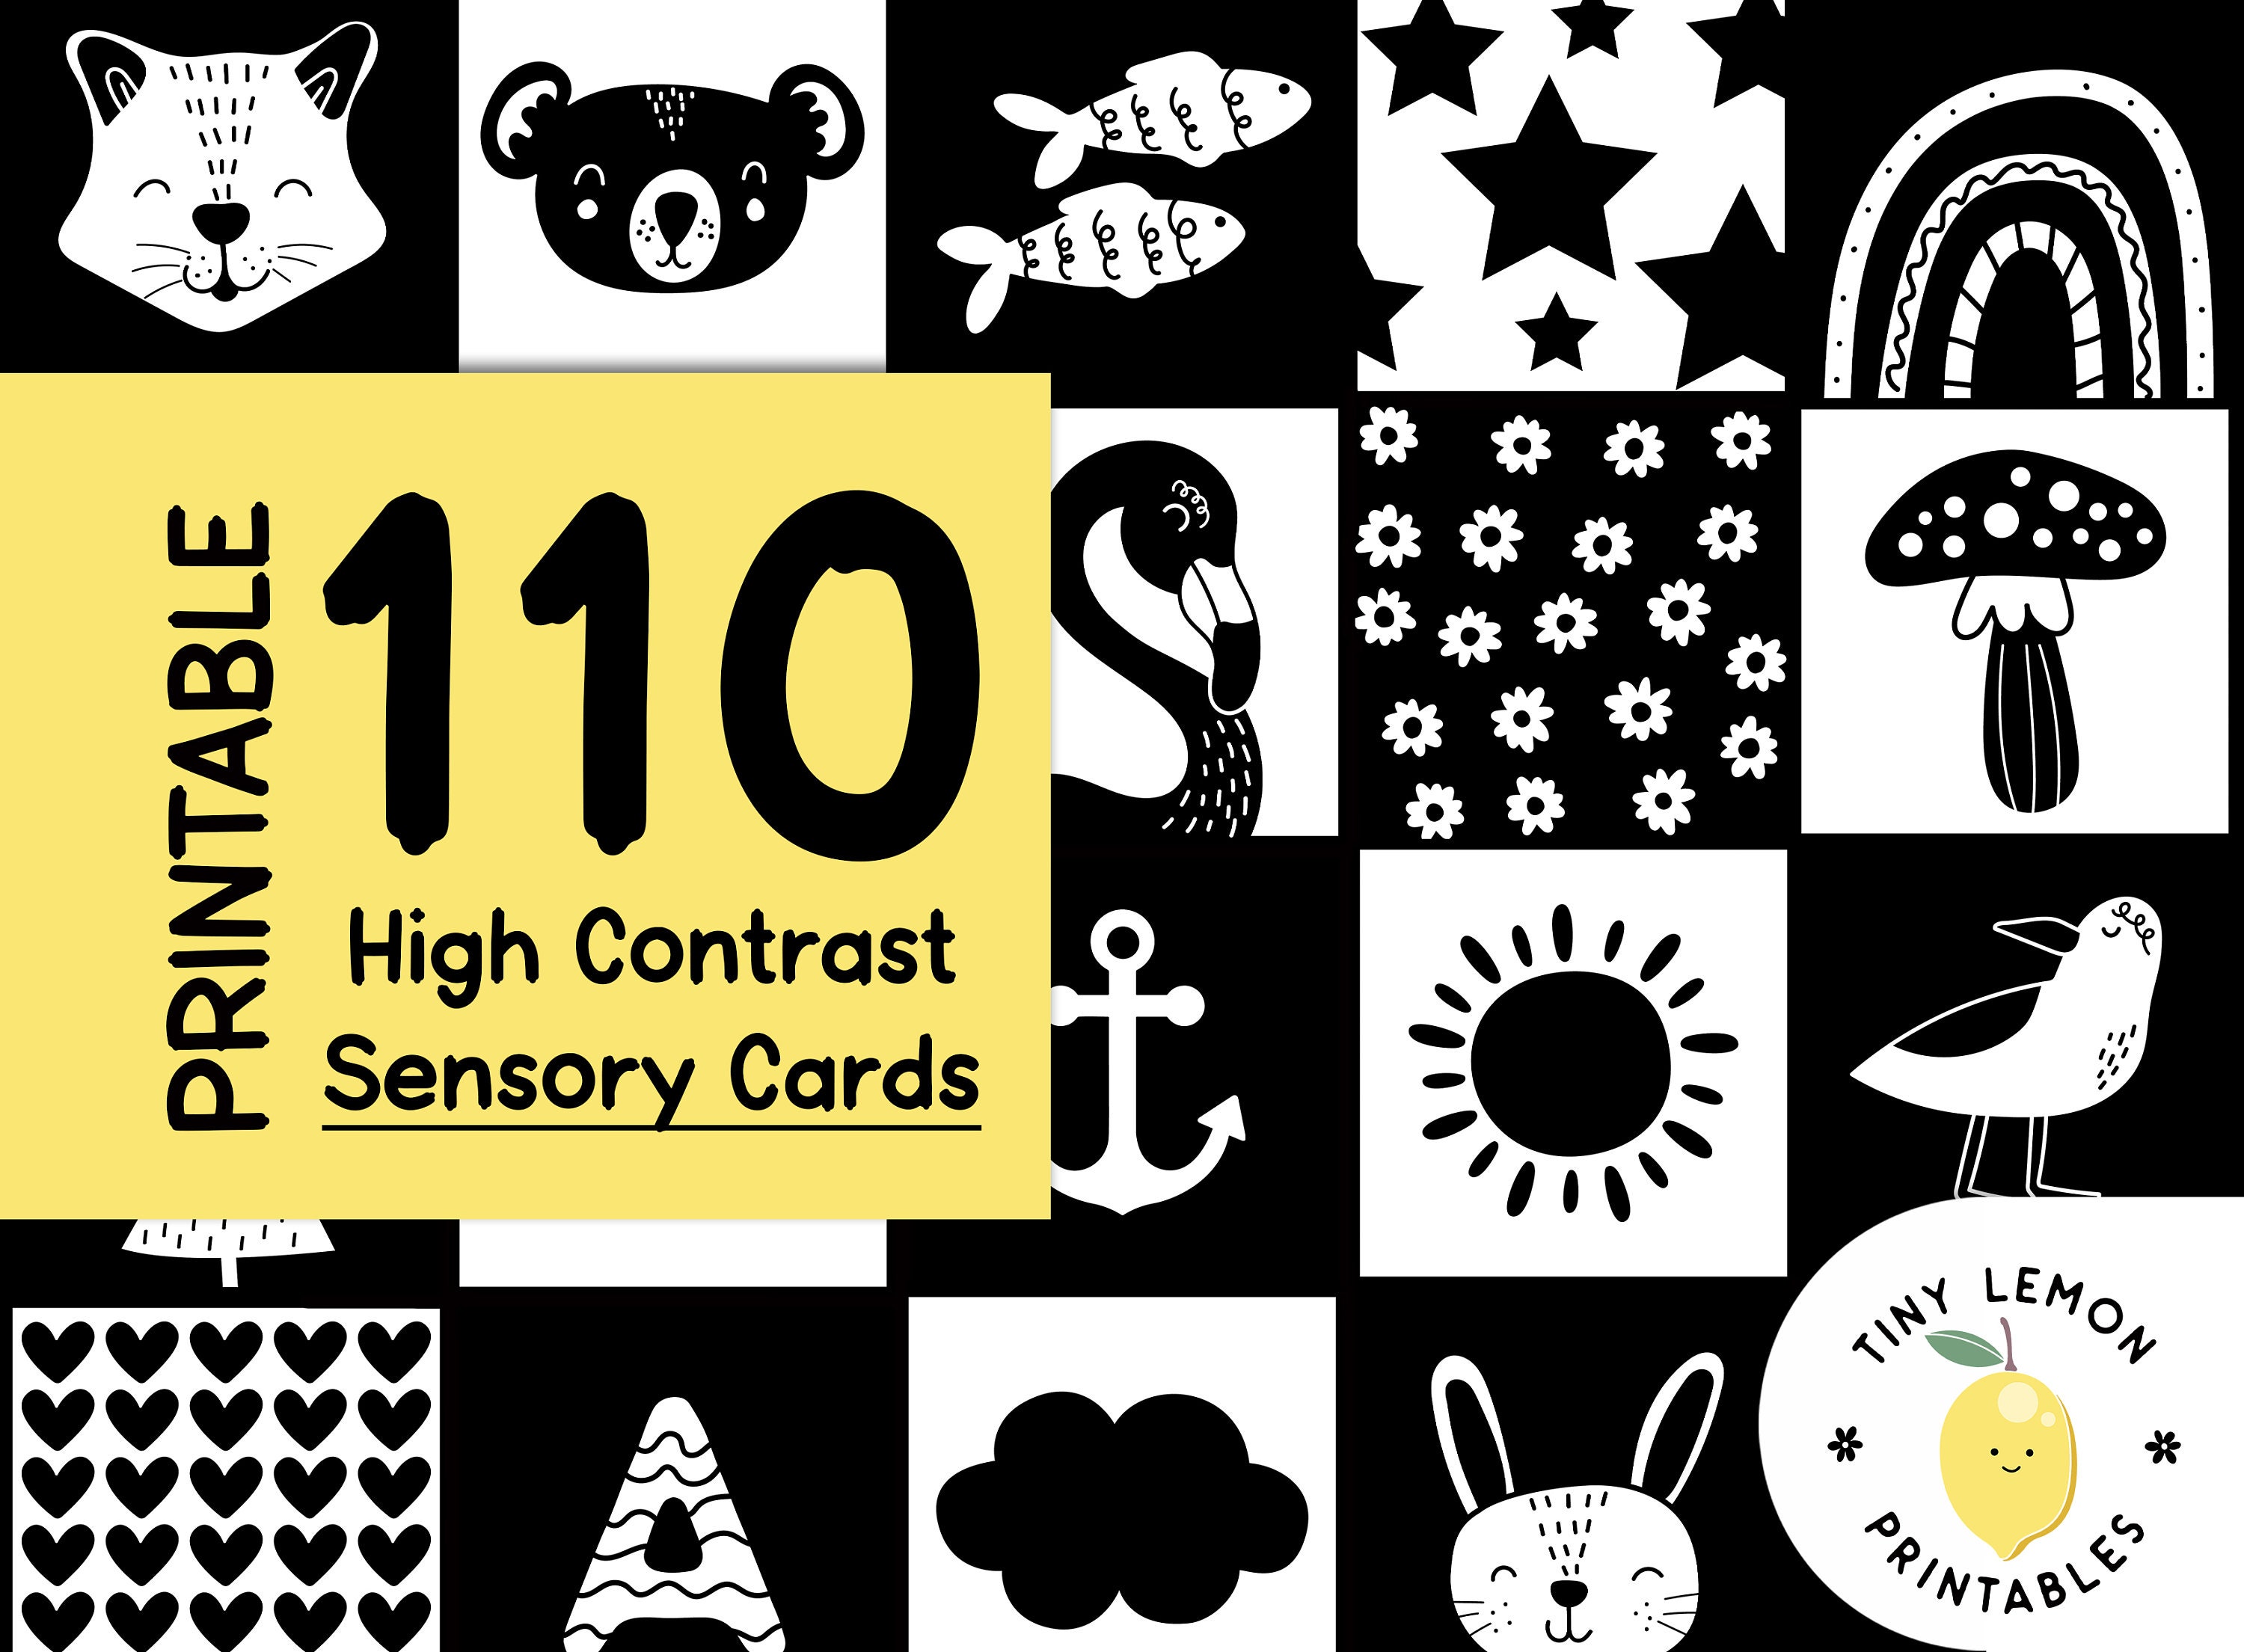 Baby Visual Stimulation Cards Montessori High Contrast Flash Card Infant  Gift✓